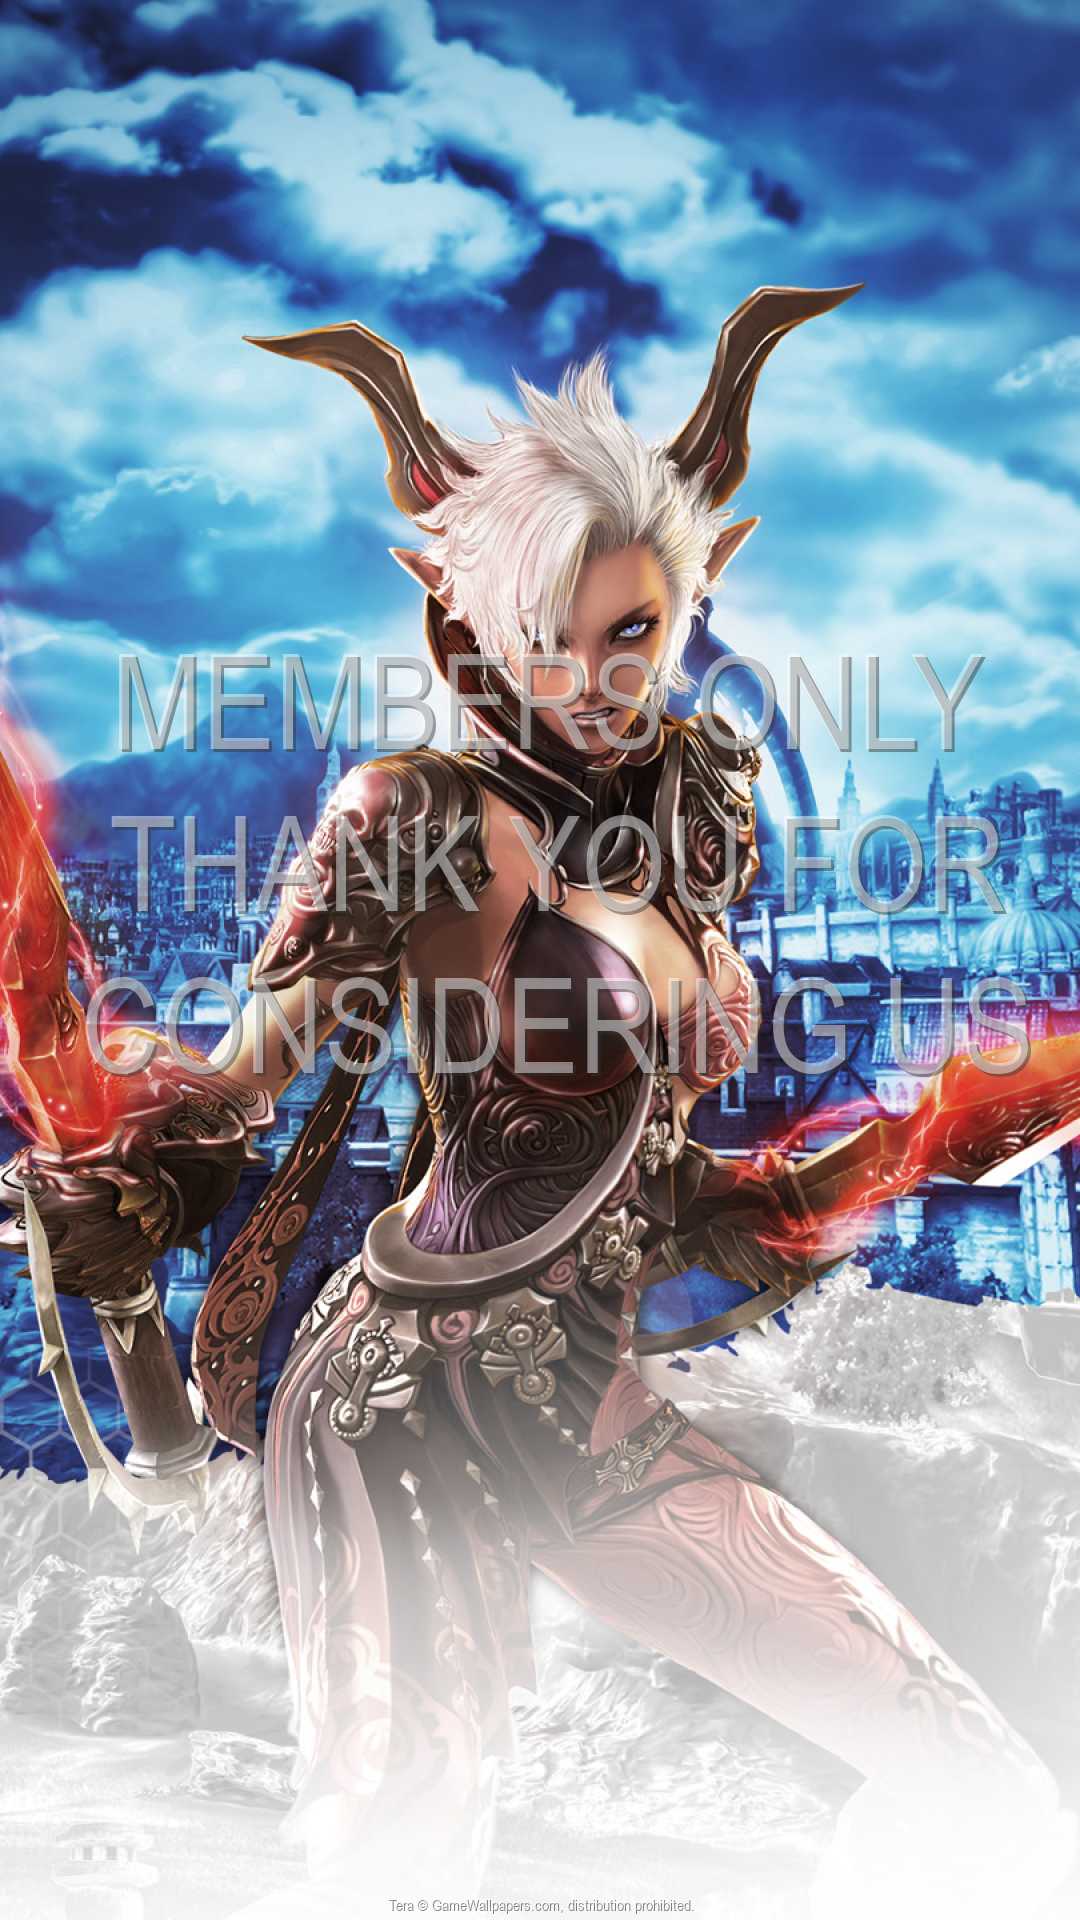 Tera 1080p%20Vertical Mobile wallpaper or background 05